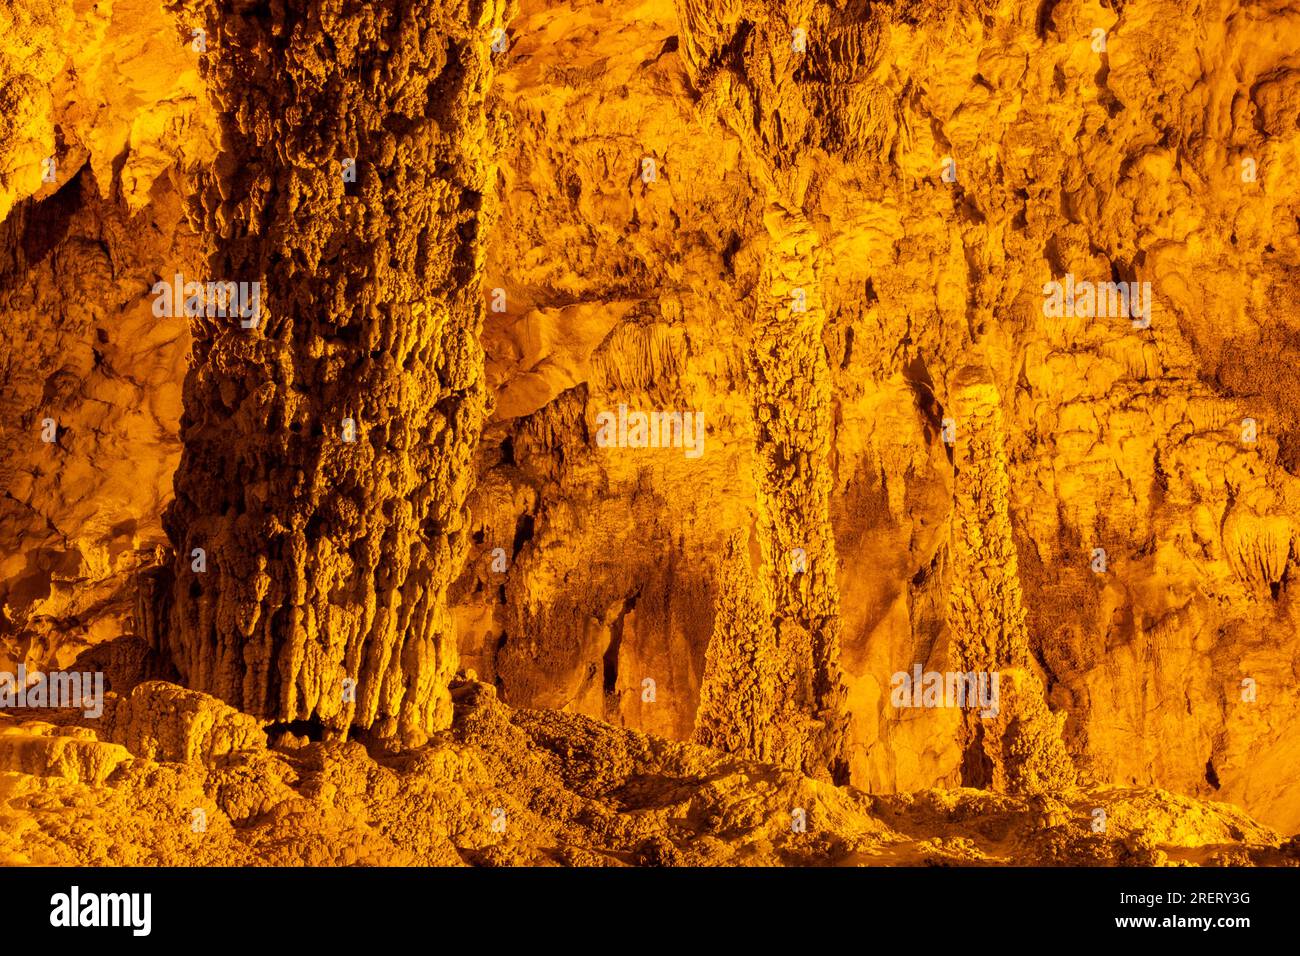 Stalactites and stalagmites in Nguom Ngao (Tiger) Cave in near Ban Gioc Waterfalls in Cao Bang Province in northern Vietnam Stock Photo